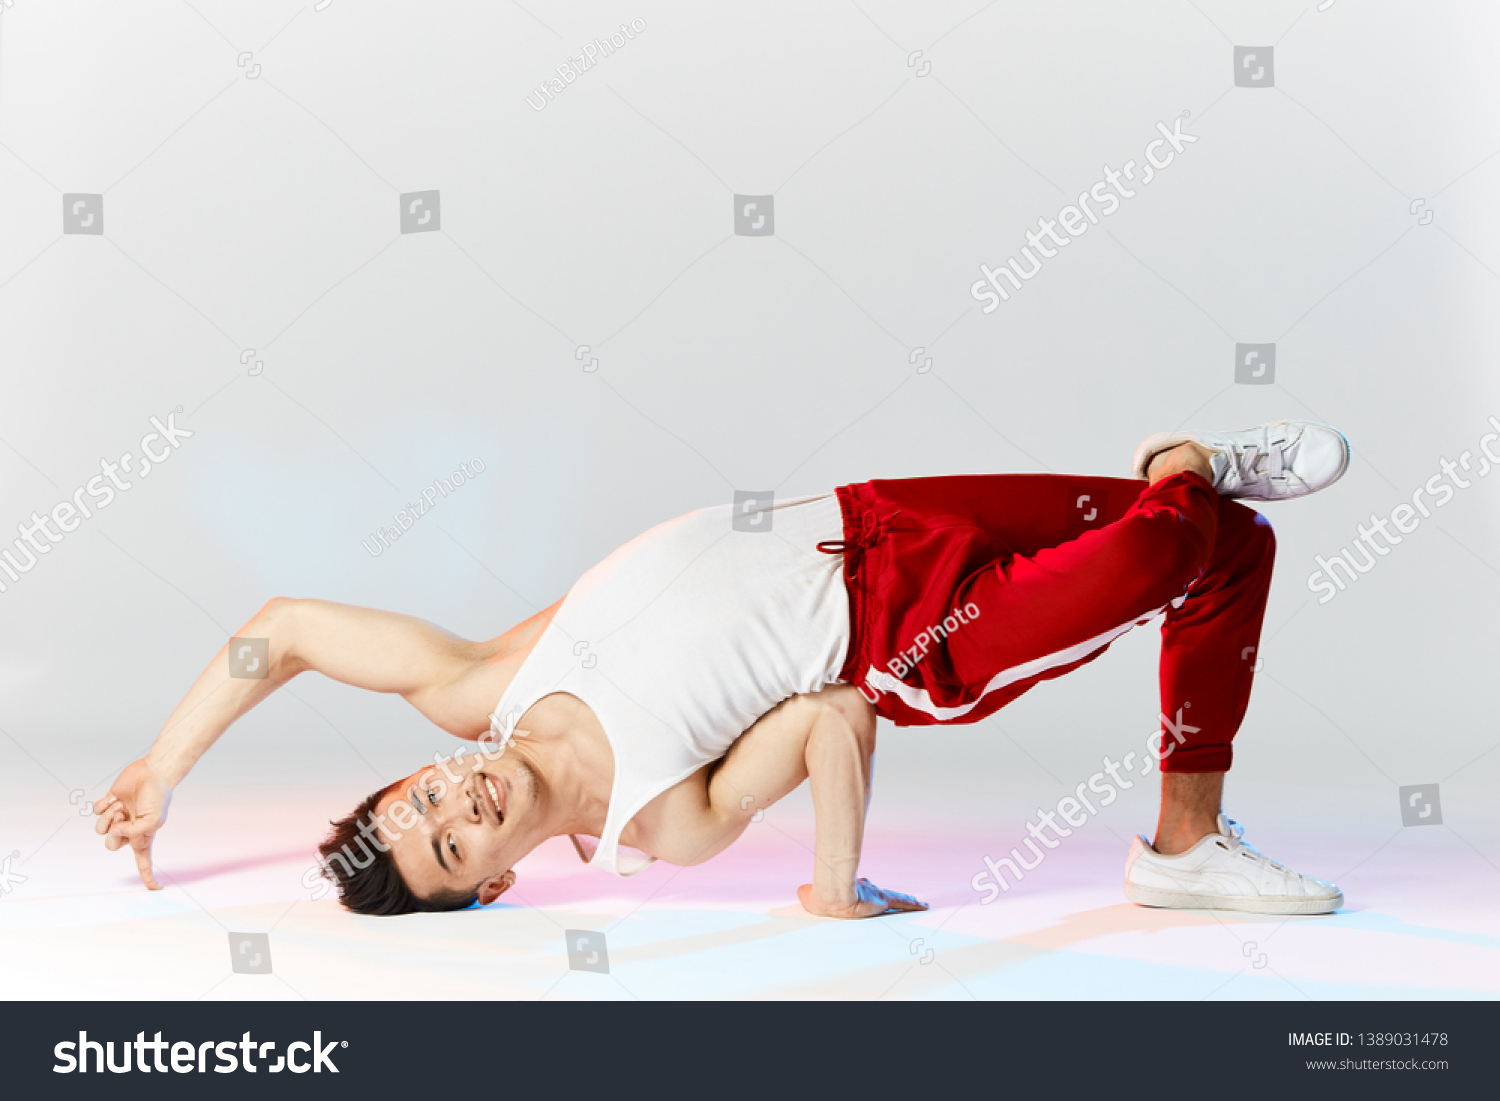 Asian male hip hop dancer or bboy freezes in Air Baby pose on the hand posing over white studio background #1389031478